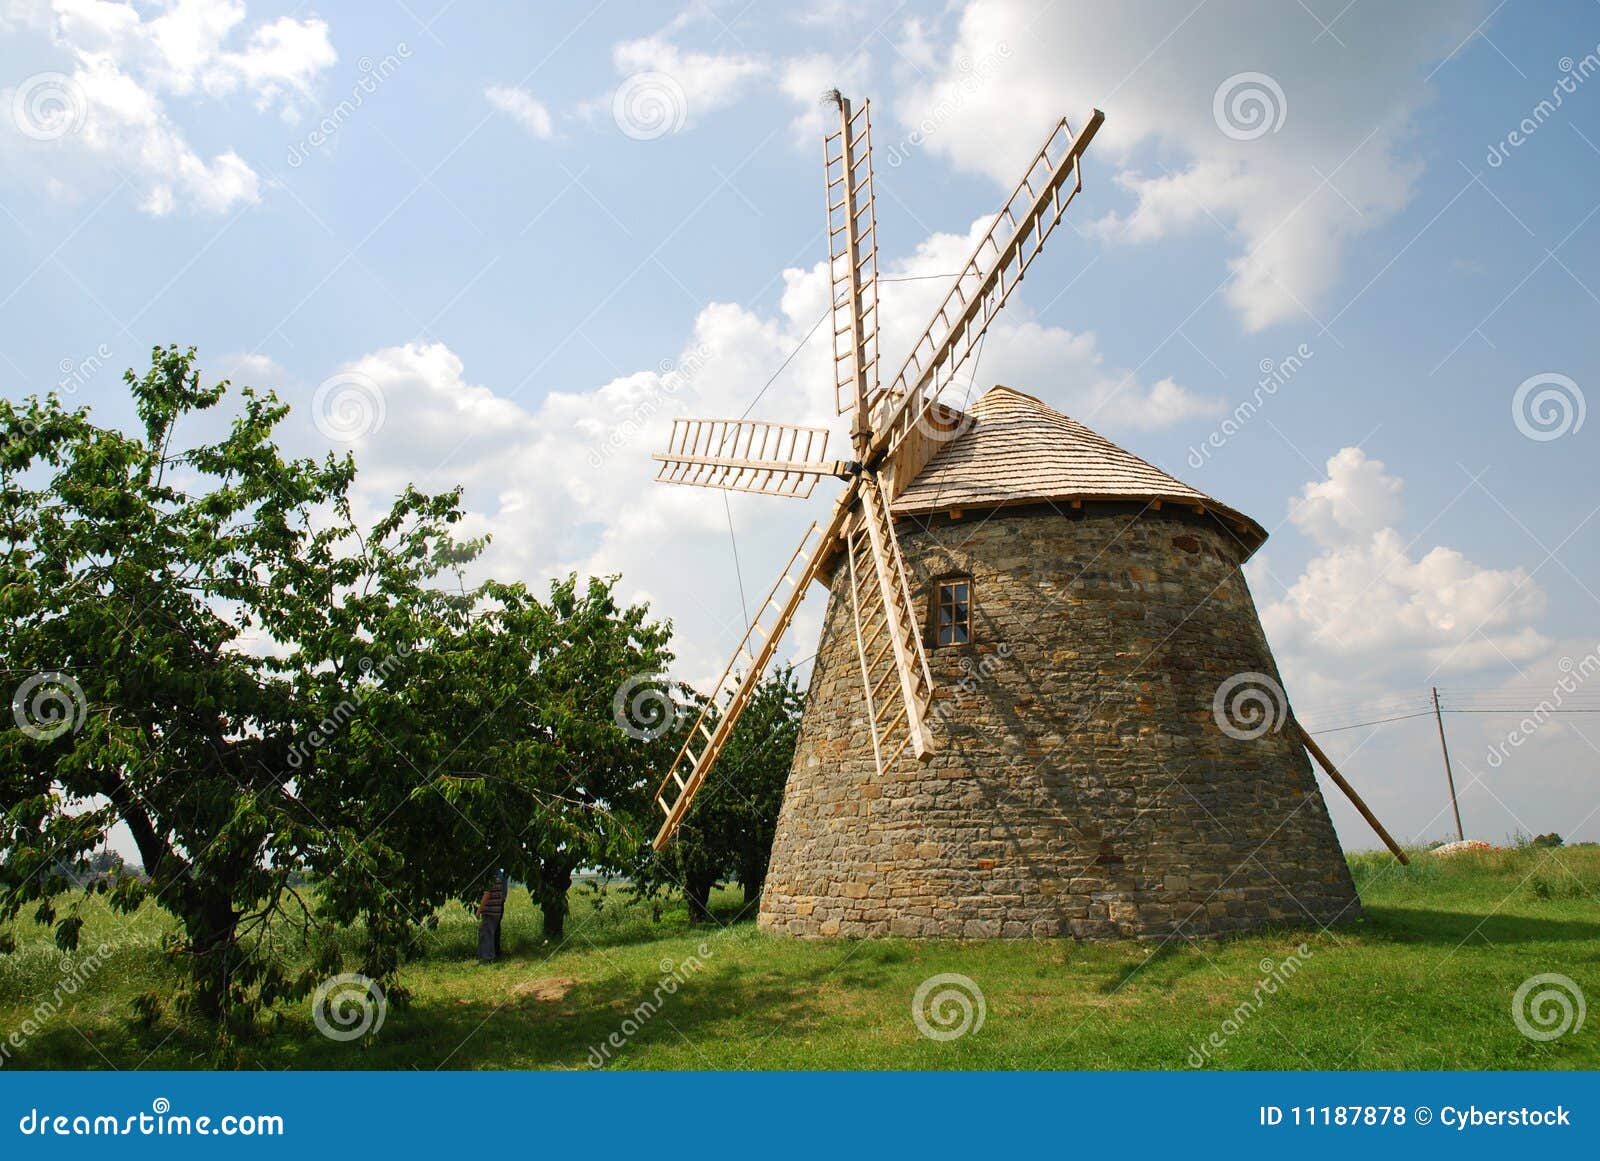 Old Windmill Royalty Free Stock Photos - Image: 11187878